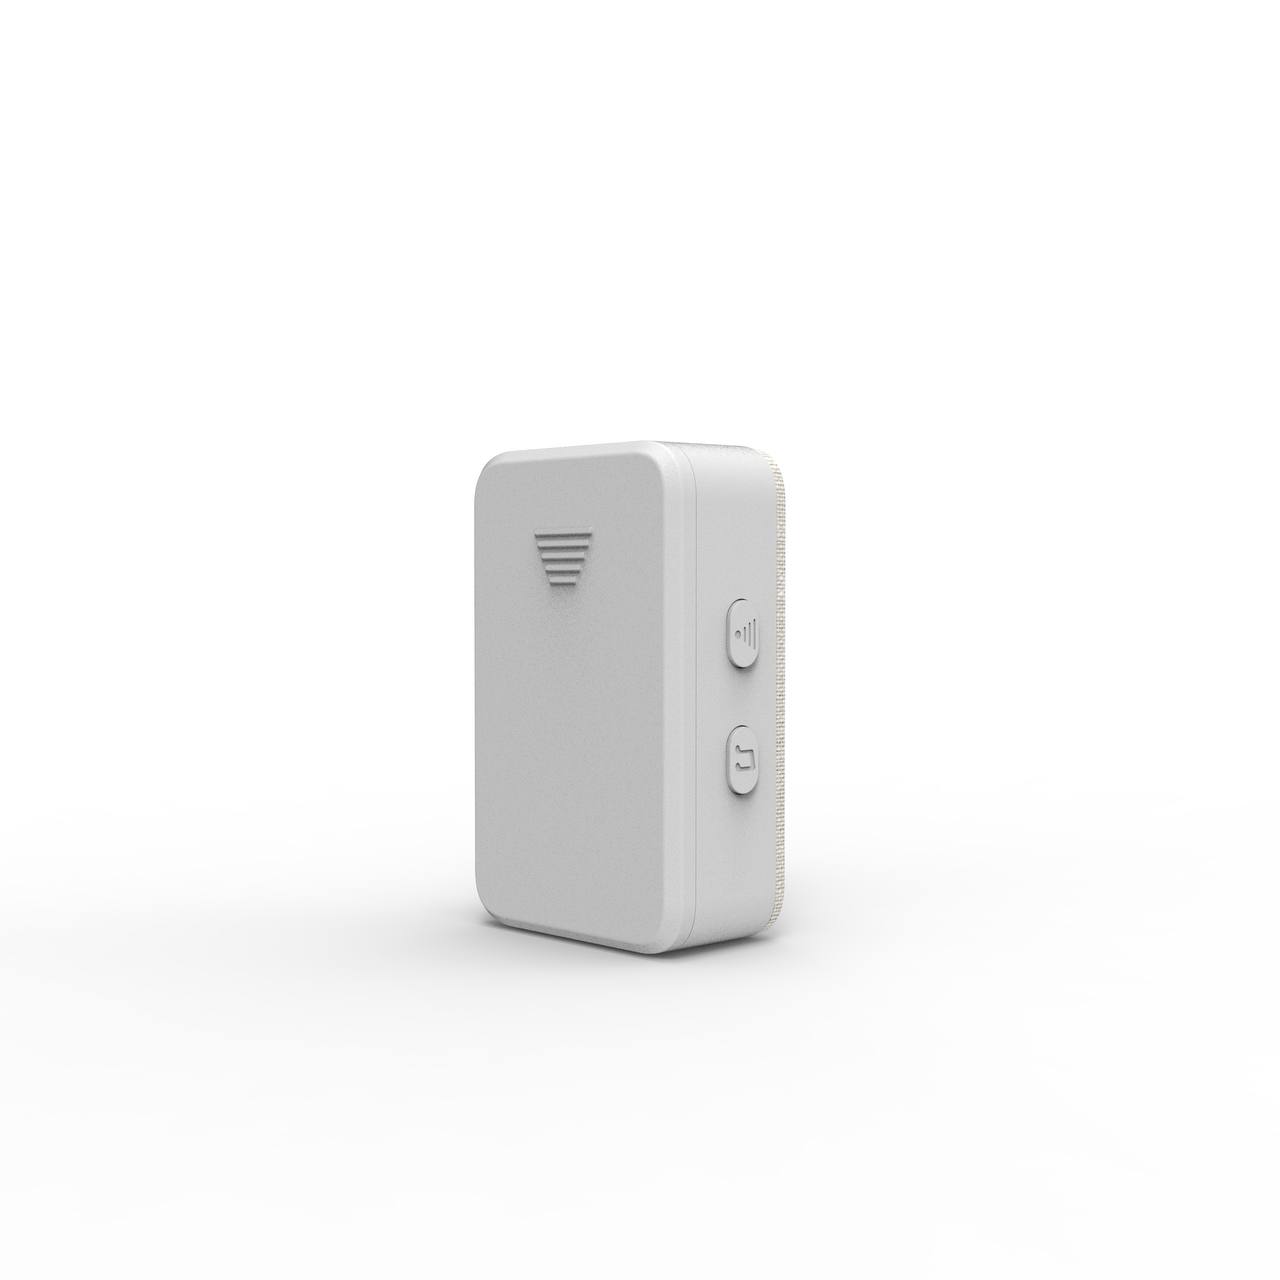 Wireless Chime (Doorbell Chime)